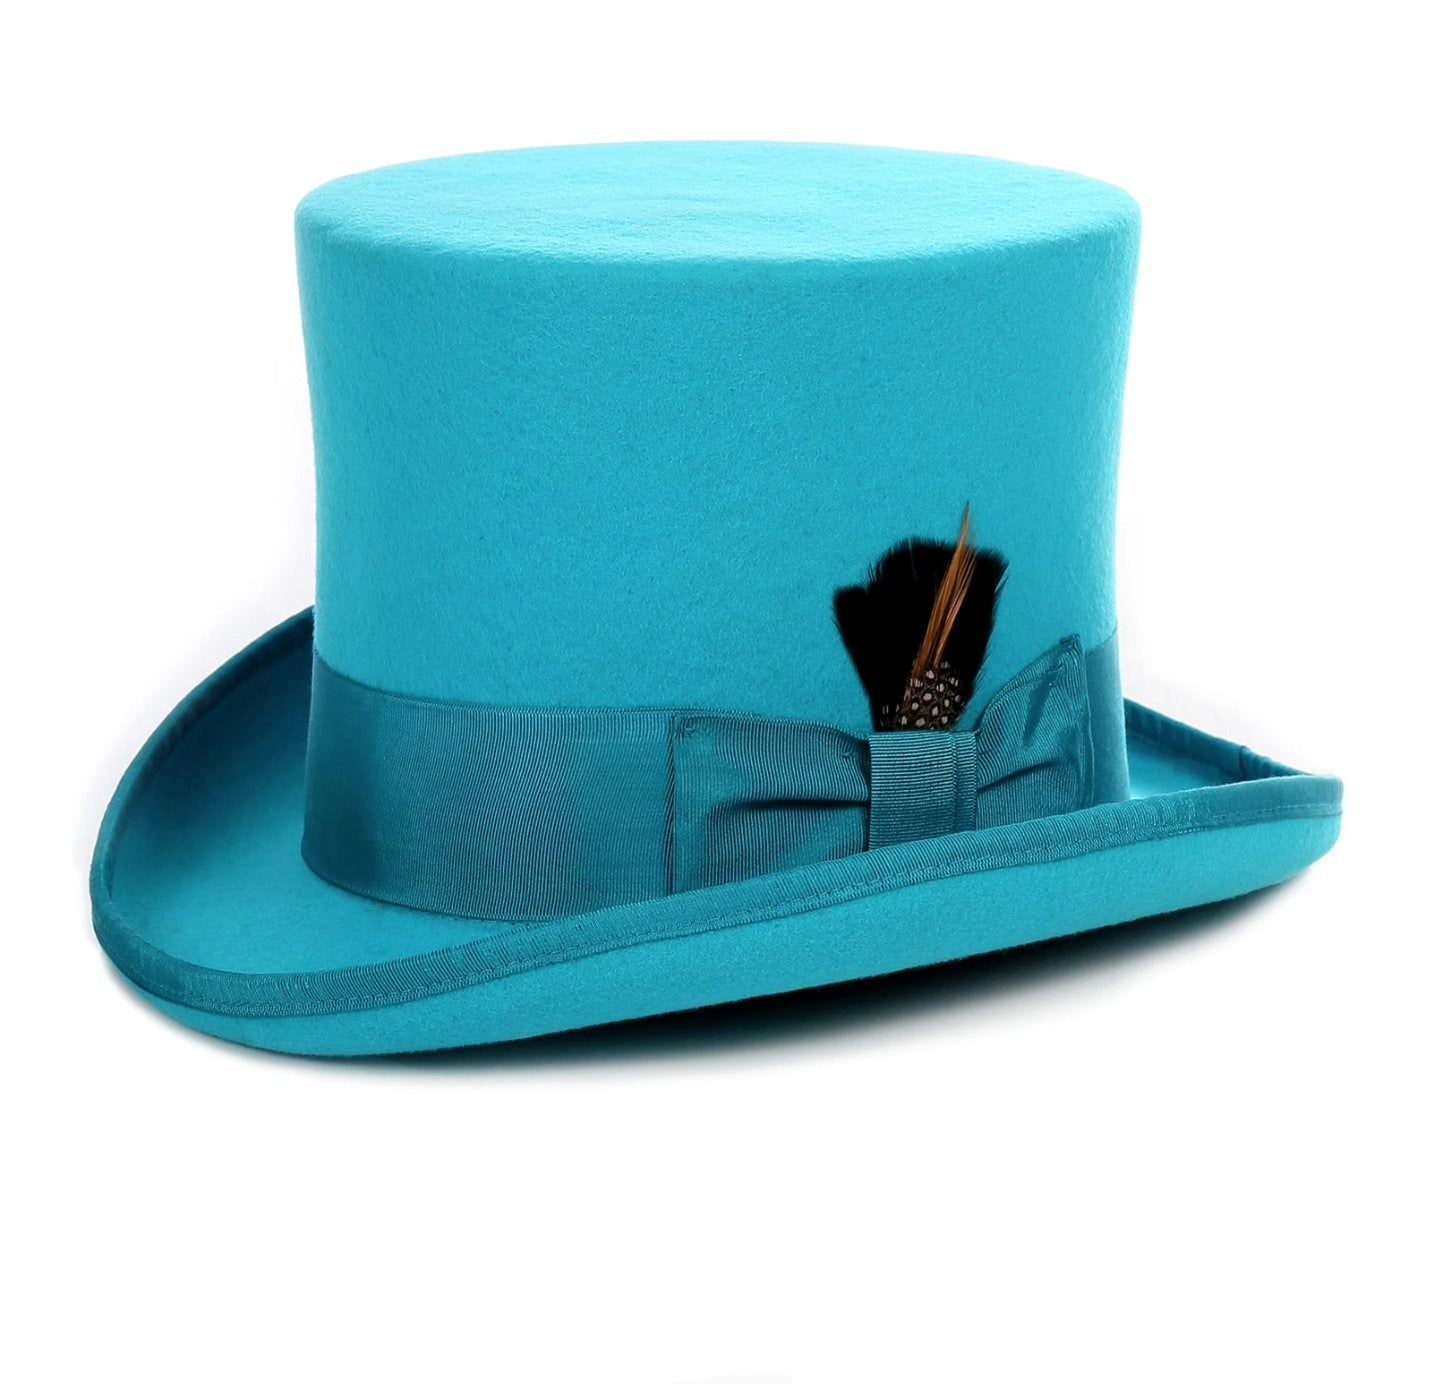 Mens Dress Tophat in Turquoise